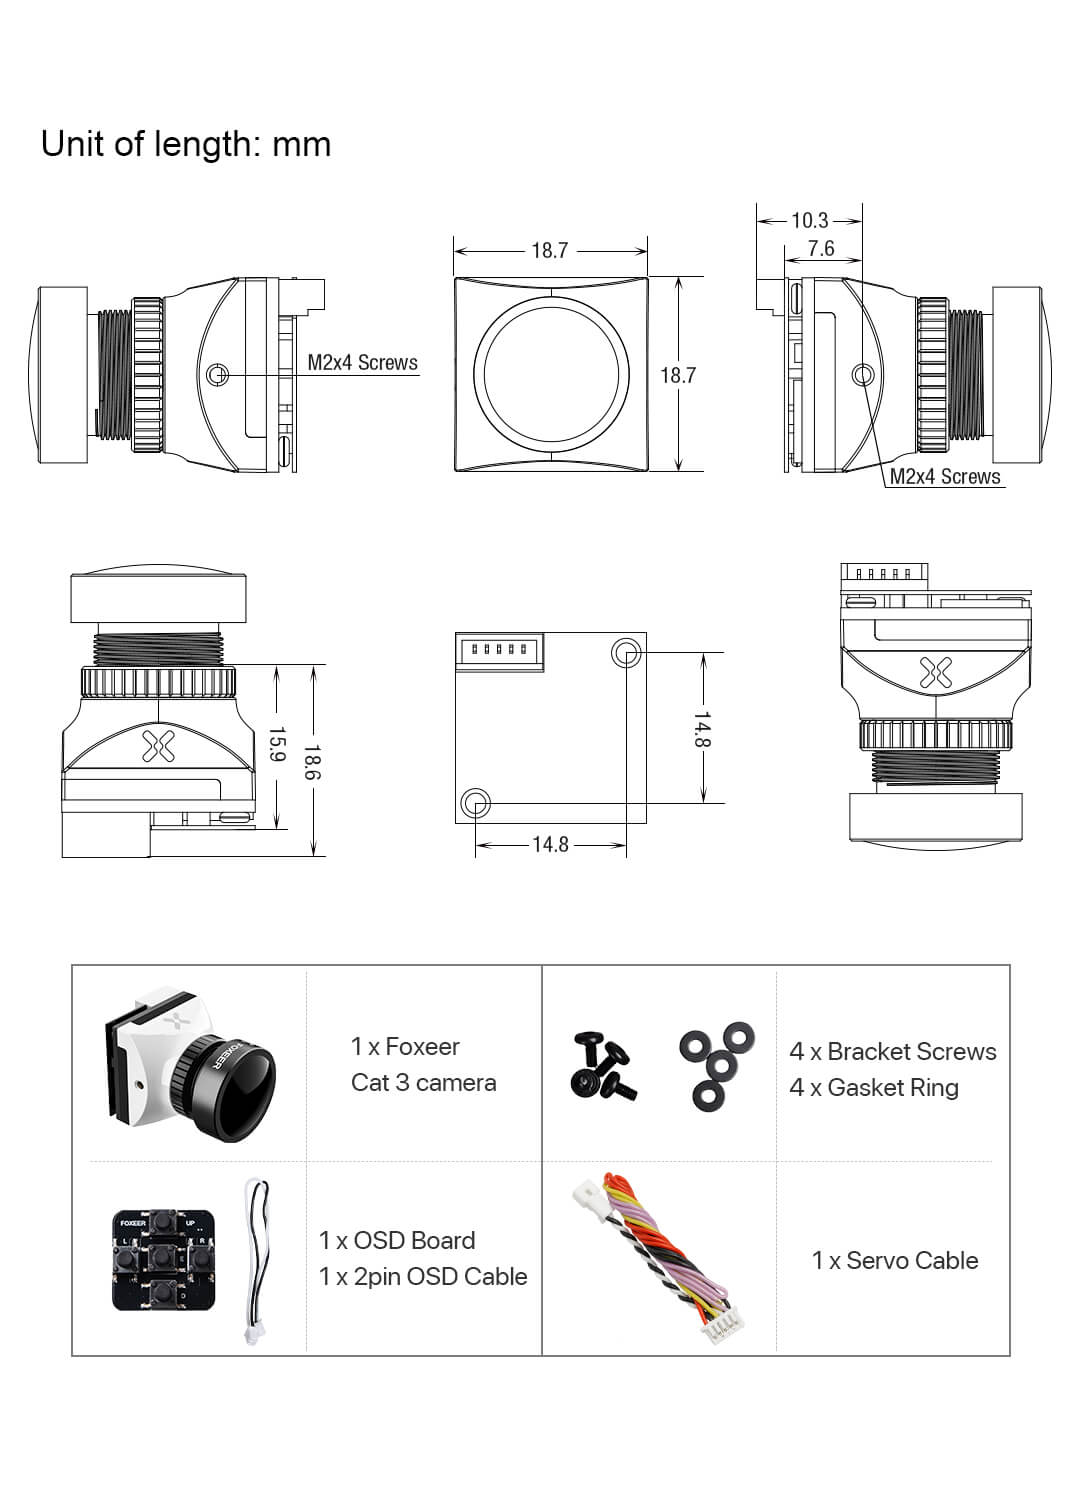 Specification of Foxeer Cat 3 camera